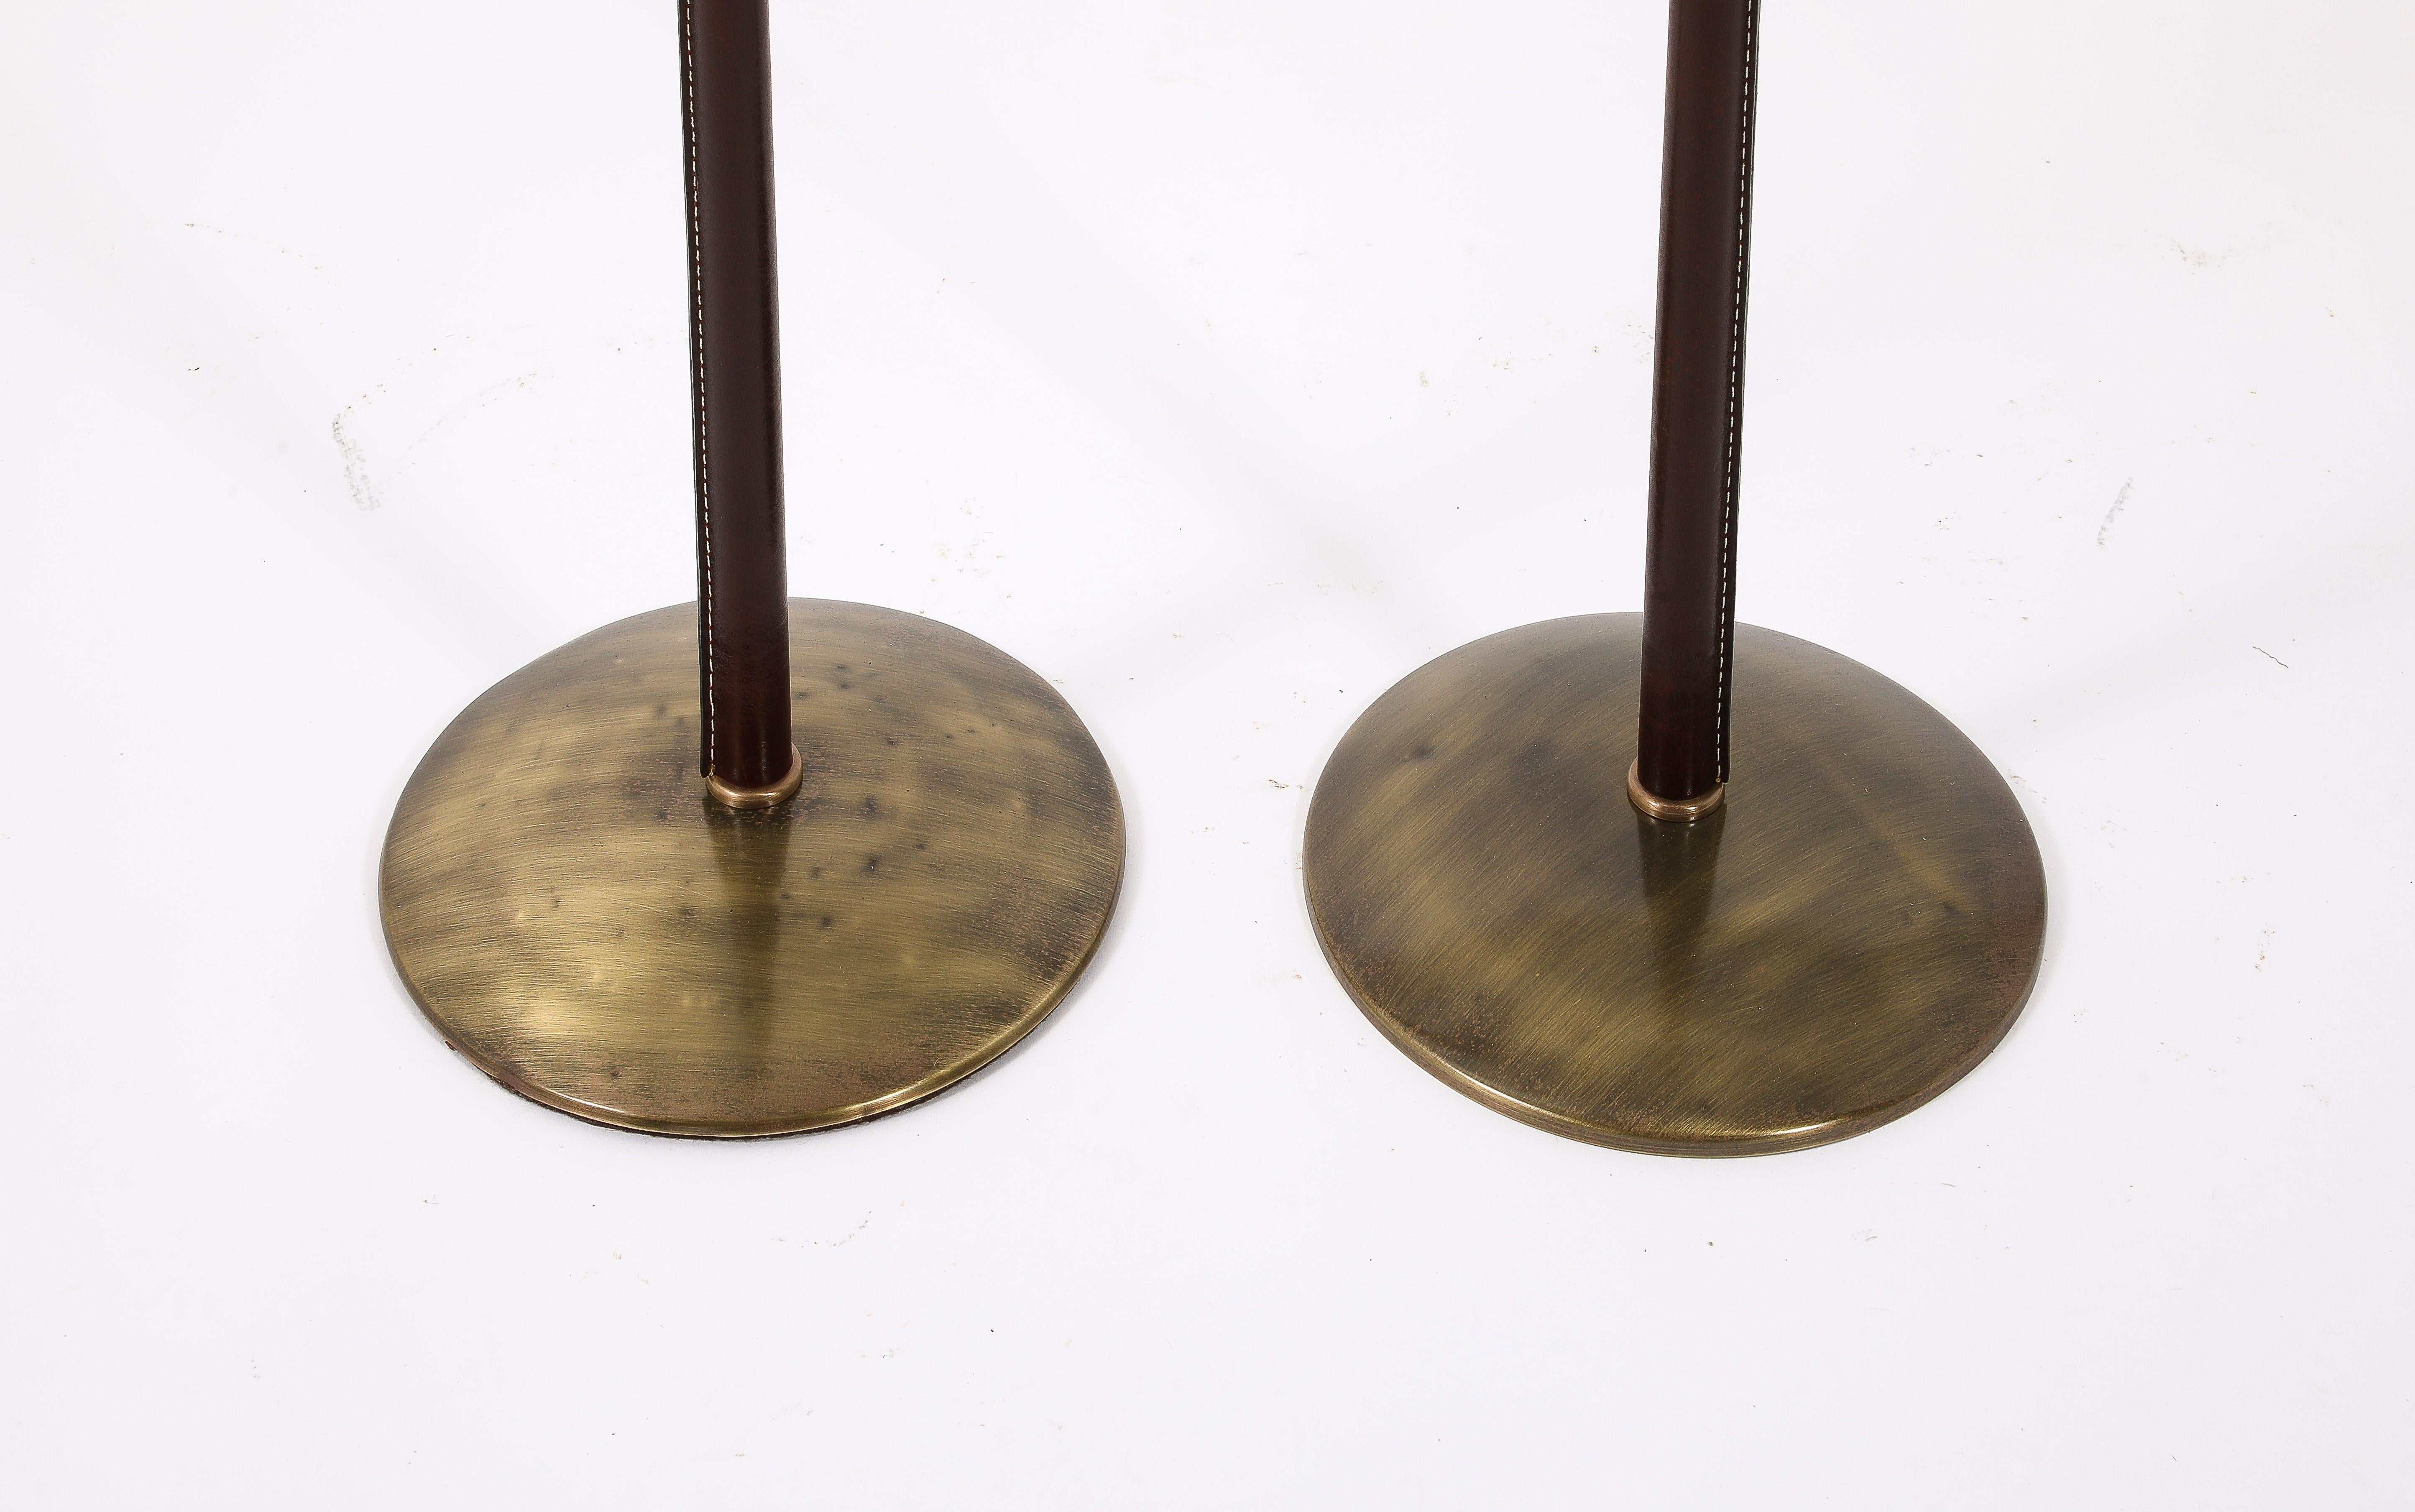 MetalArte Brass & Stitched Brown Leather Floor Lamps, Spain 1960's For Sale 1